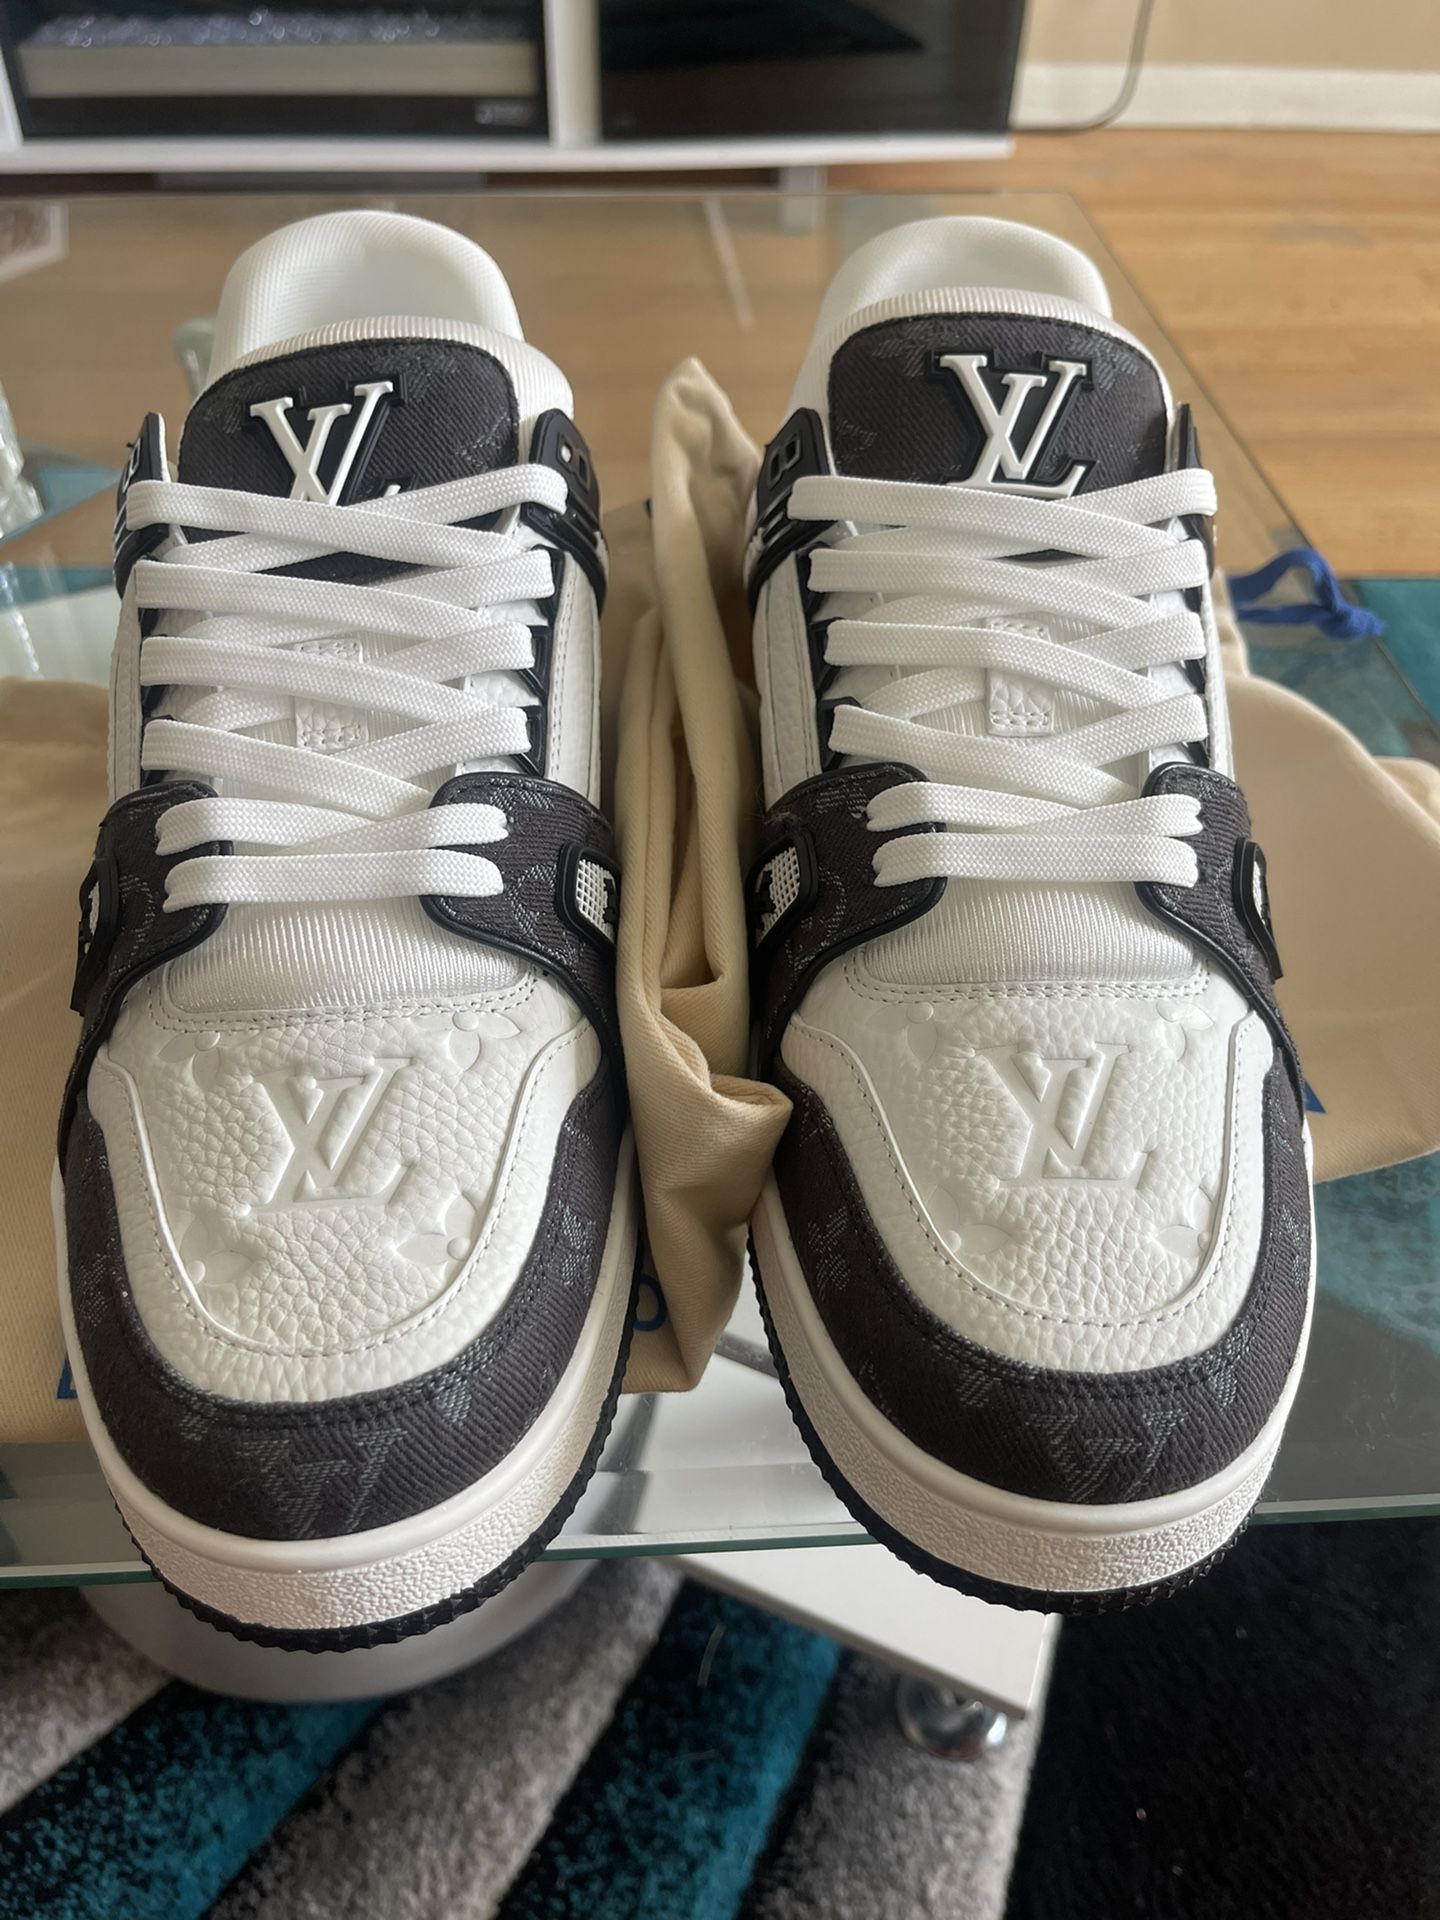 Lv Sport Shoes for Sale in East Moline, IL - OfferUp